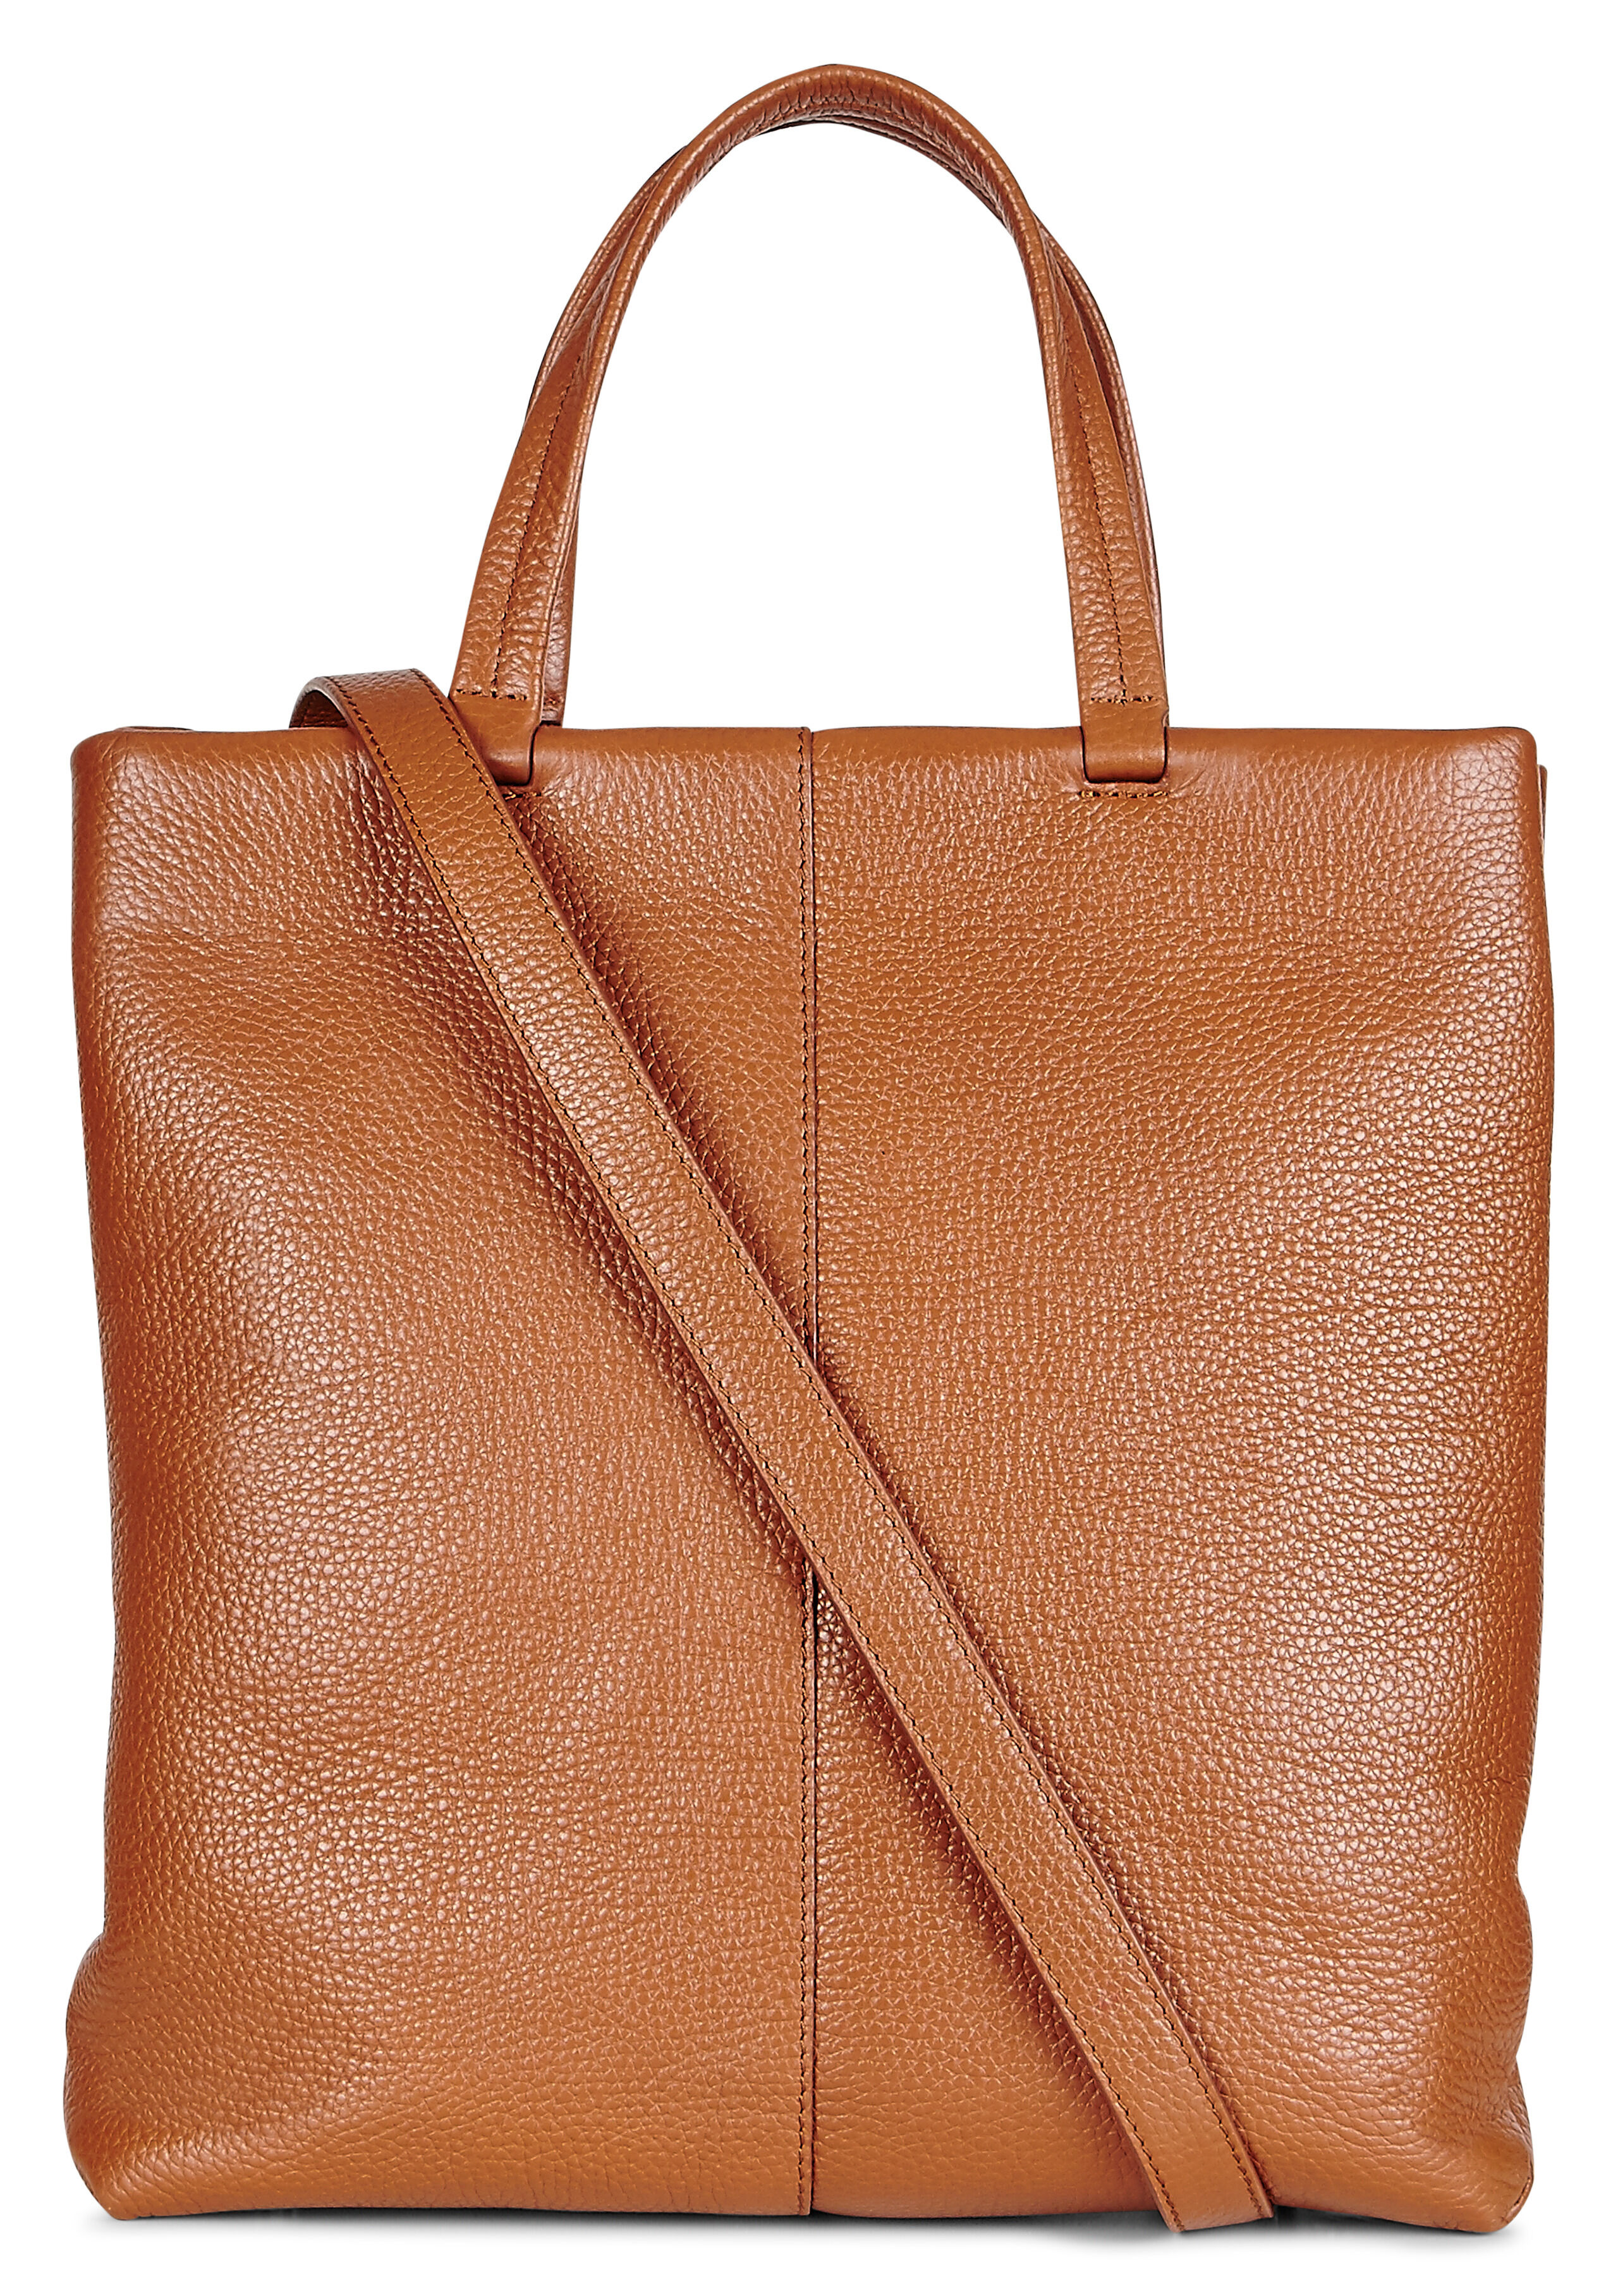 ECCO Isan 2 Tote | Tote Bags | ECCO® Shoes